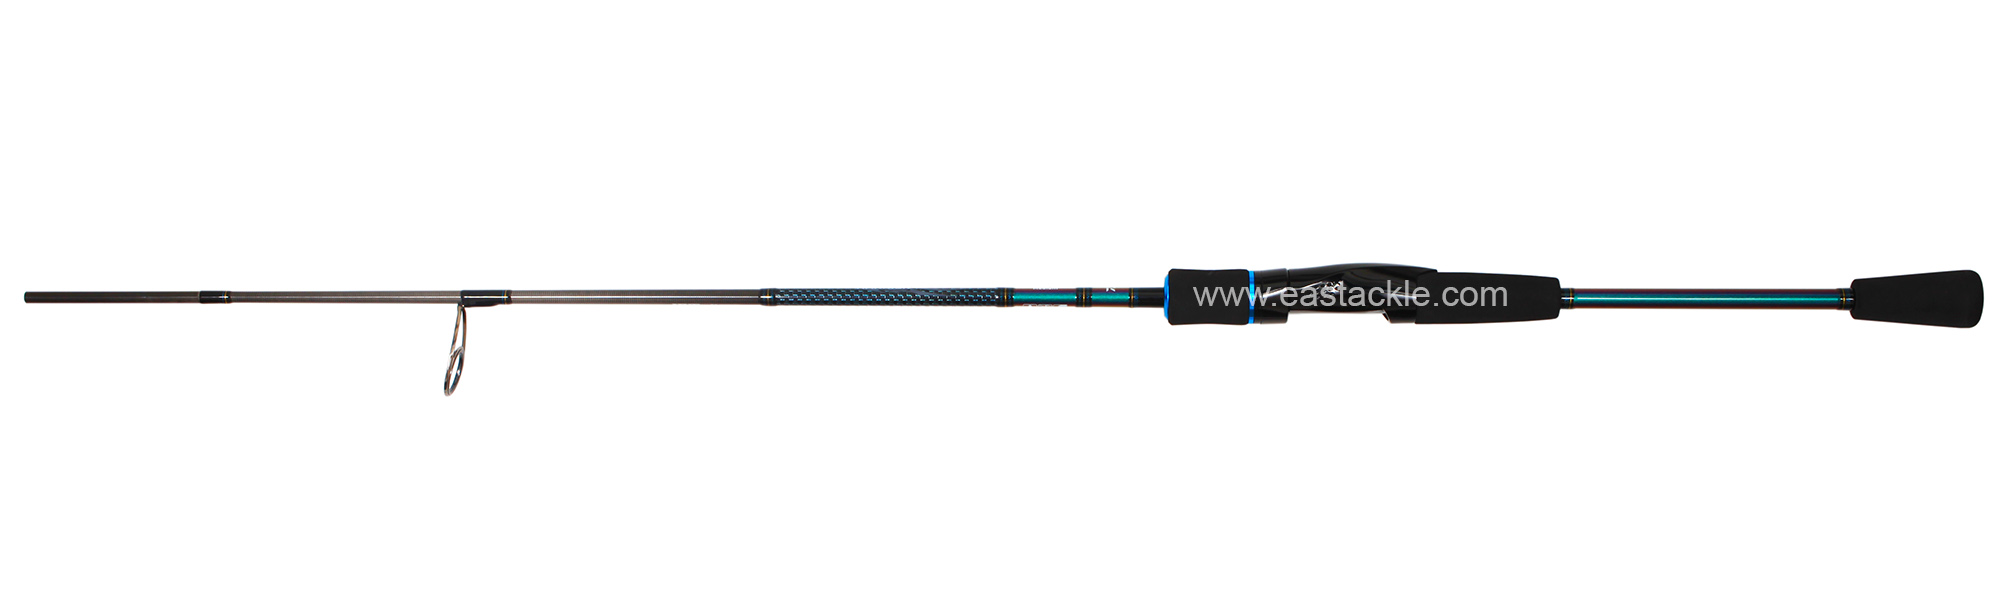 Daiwa - Harrier 602MHS-SD - Spinning Rod - Butt to Stripper Guide (Side View)  Eastackle